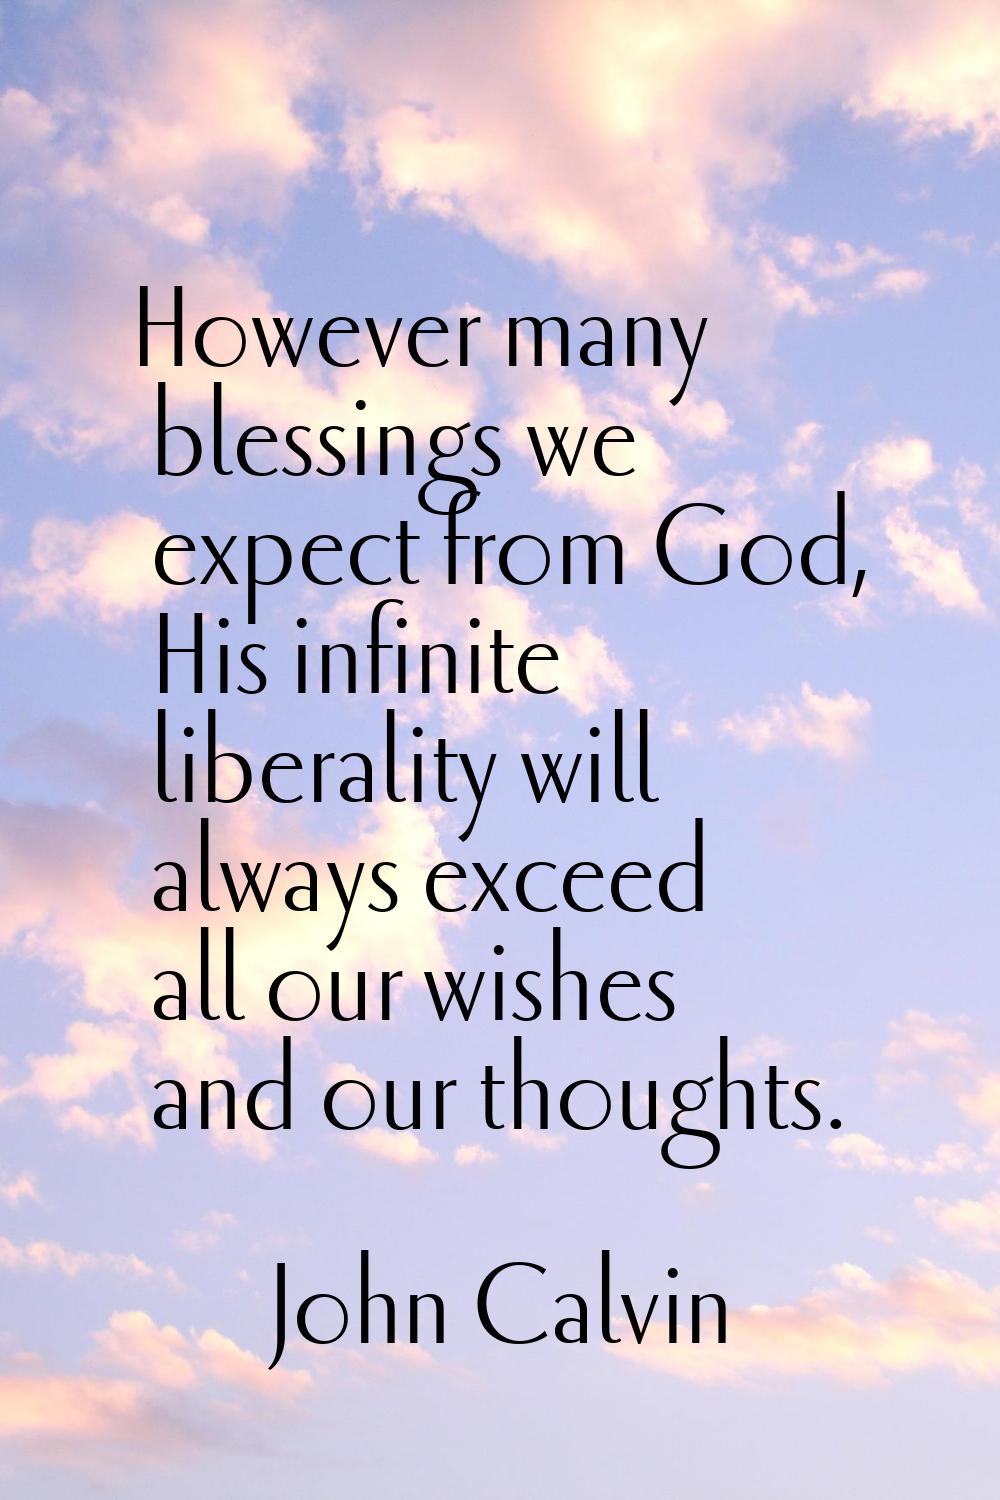 However many blessings we expect from God, His infinite liberality will always exceed all our wishe